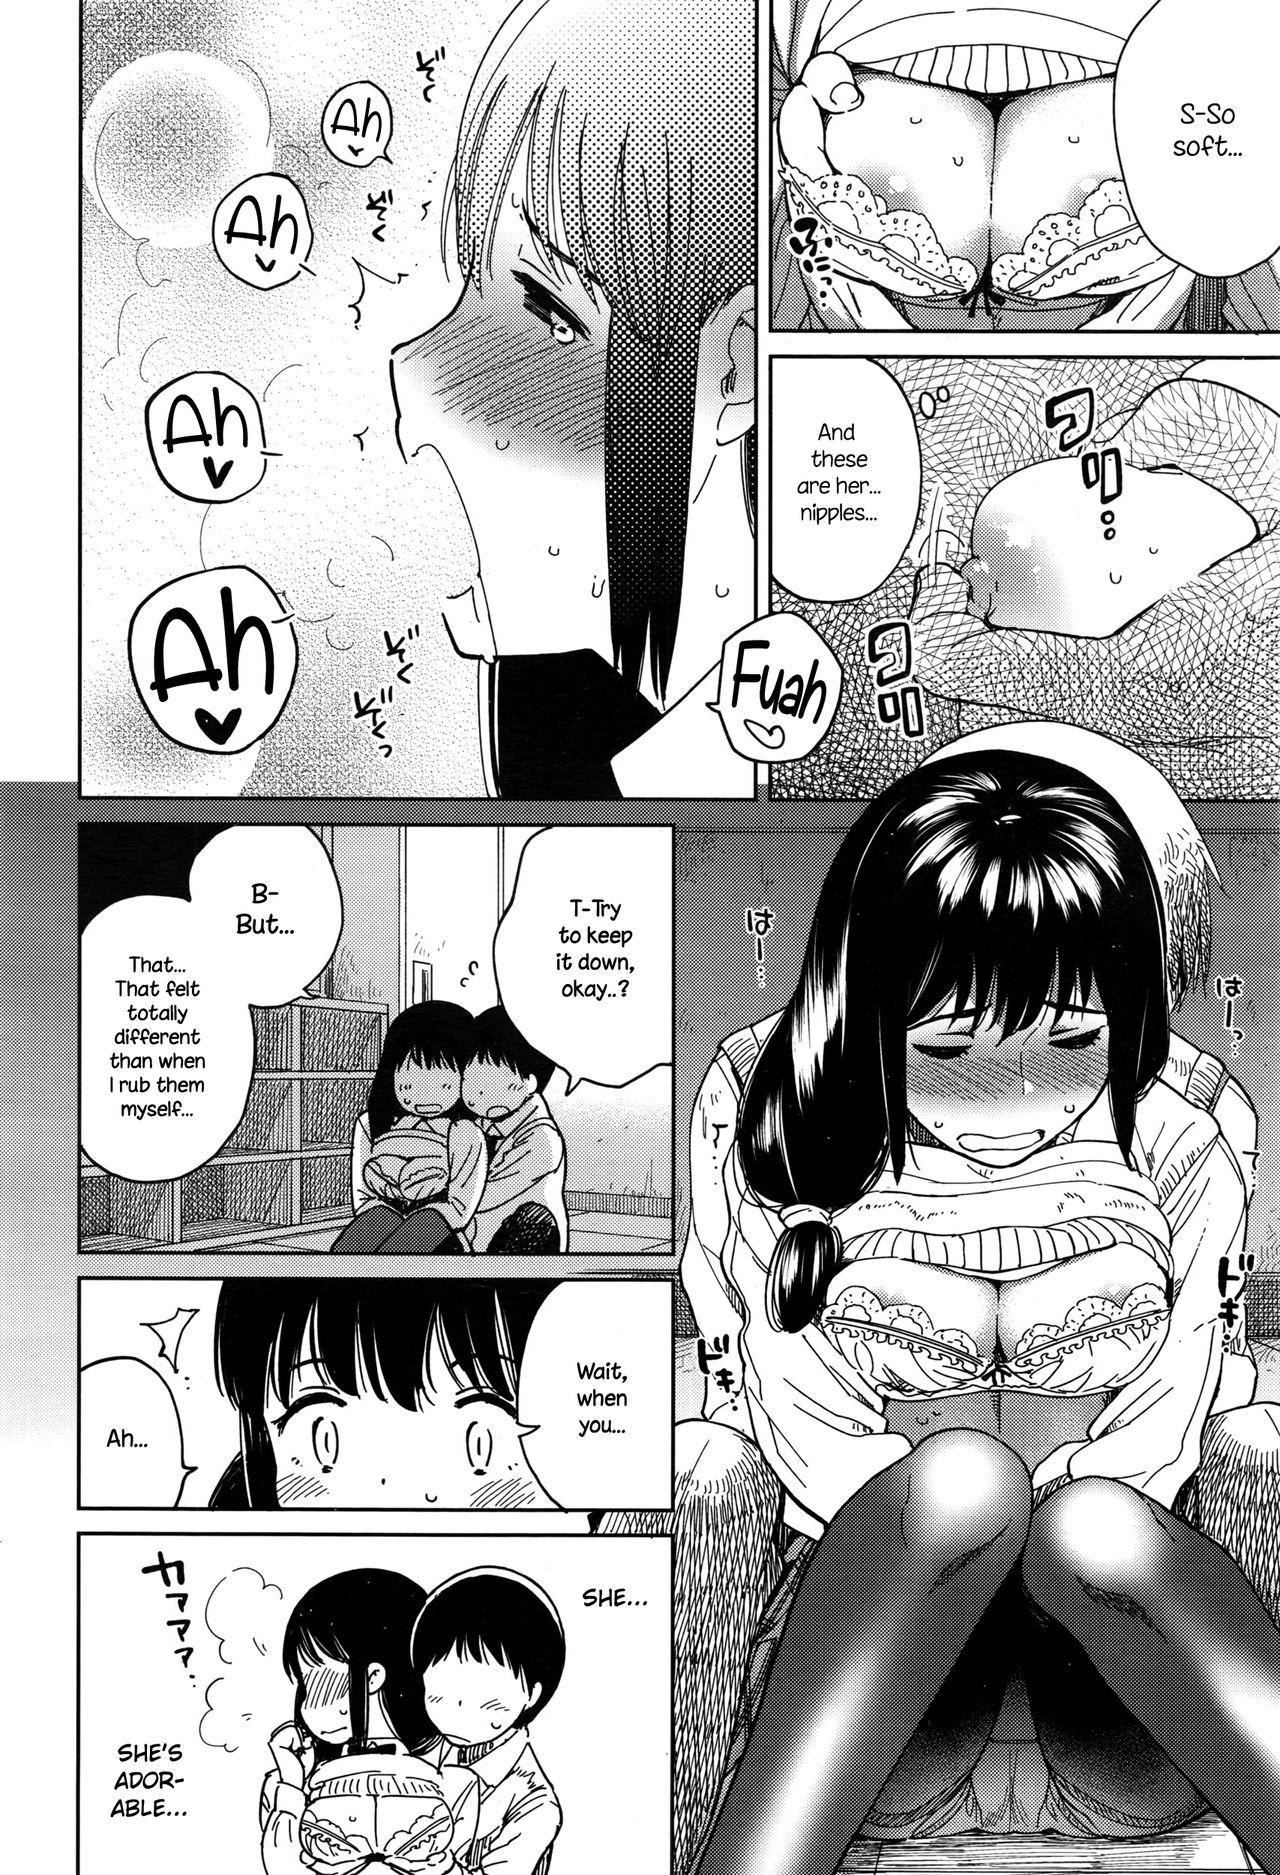 Masterbation Houkago Rendezvous | Afterschool Rendezvous Cougar - Page 6